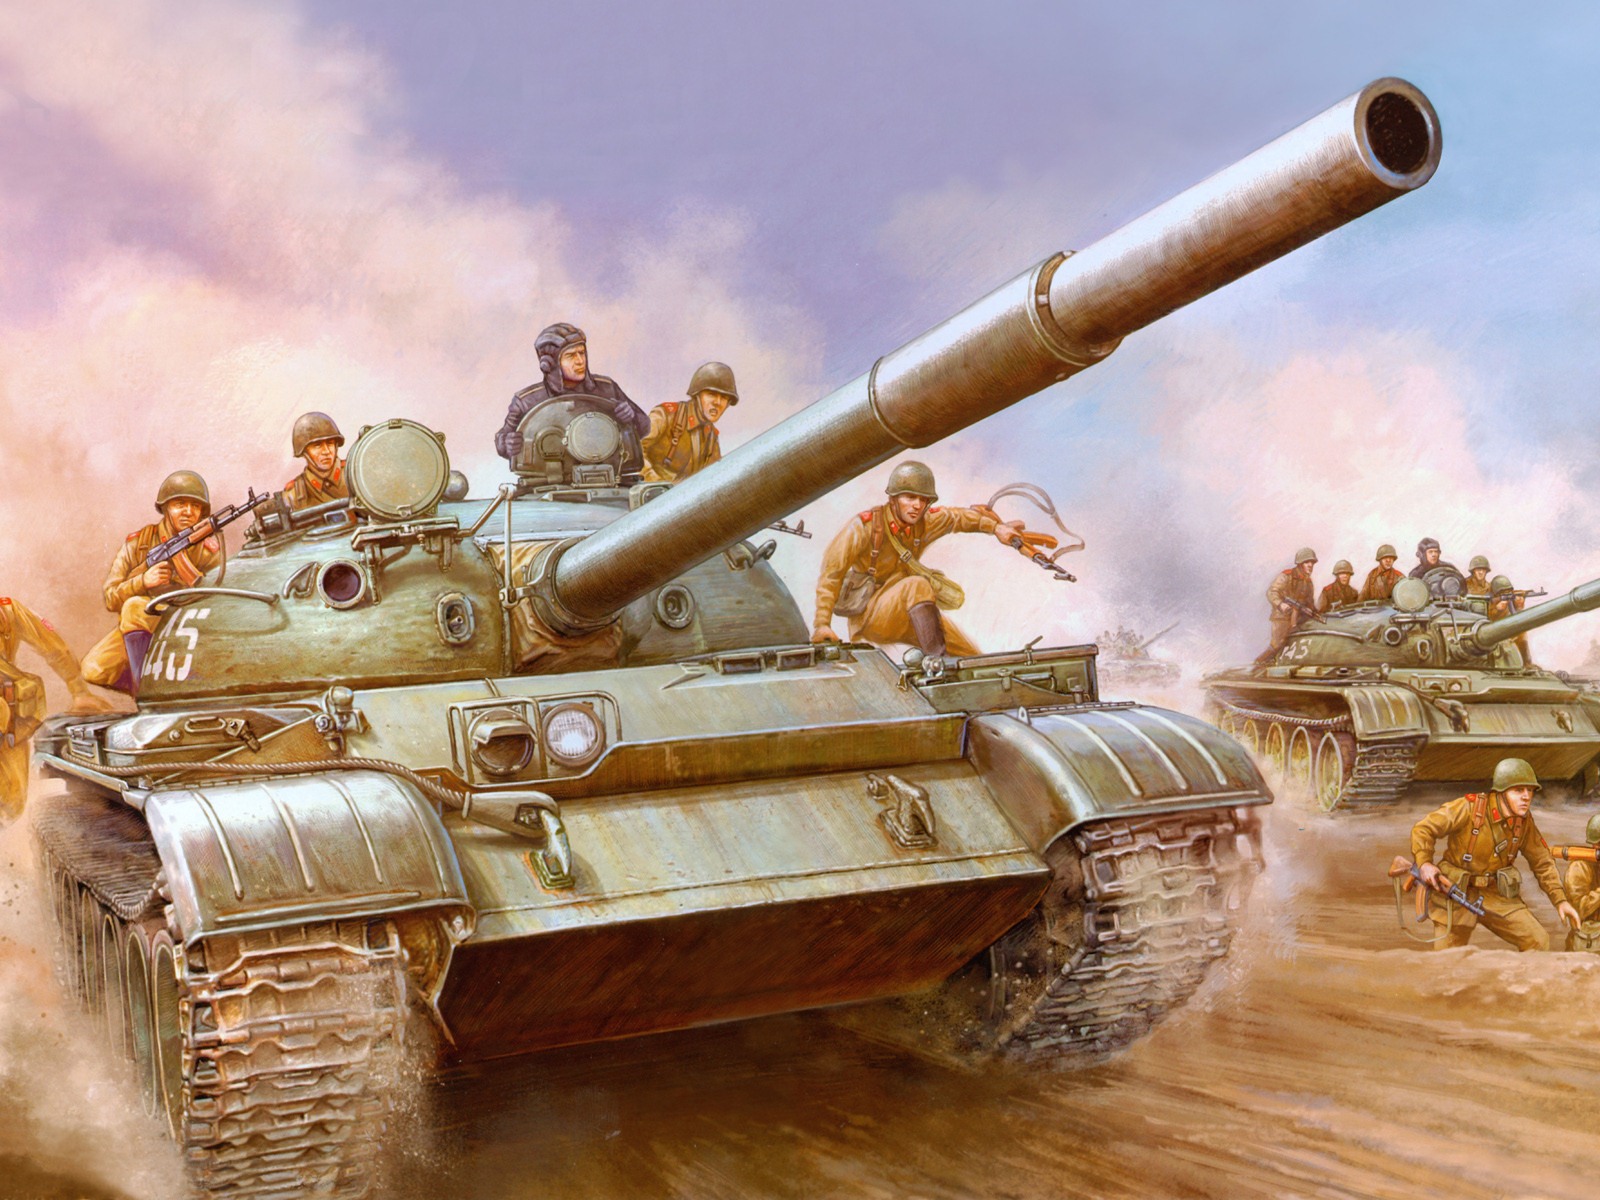 Military tanks, armored HD painting wallpapers #16 - 1600x1200